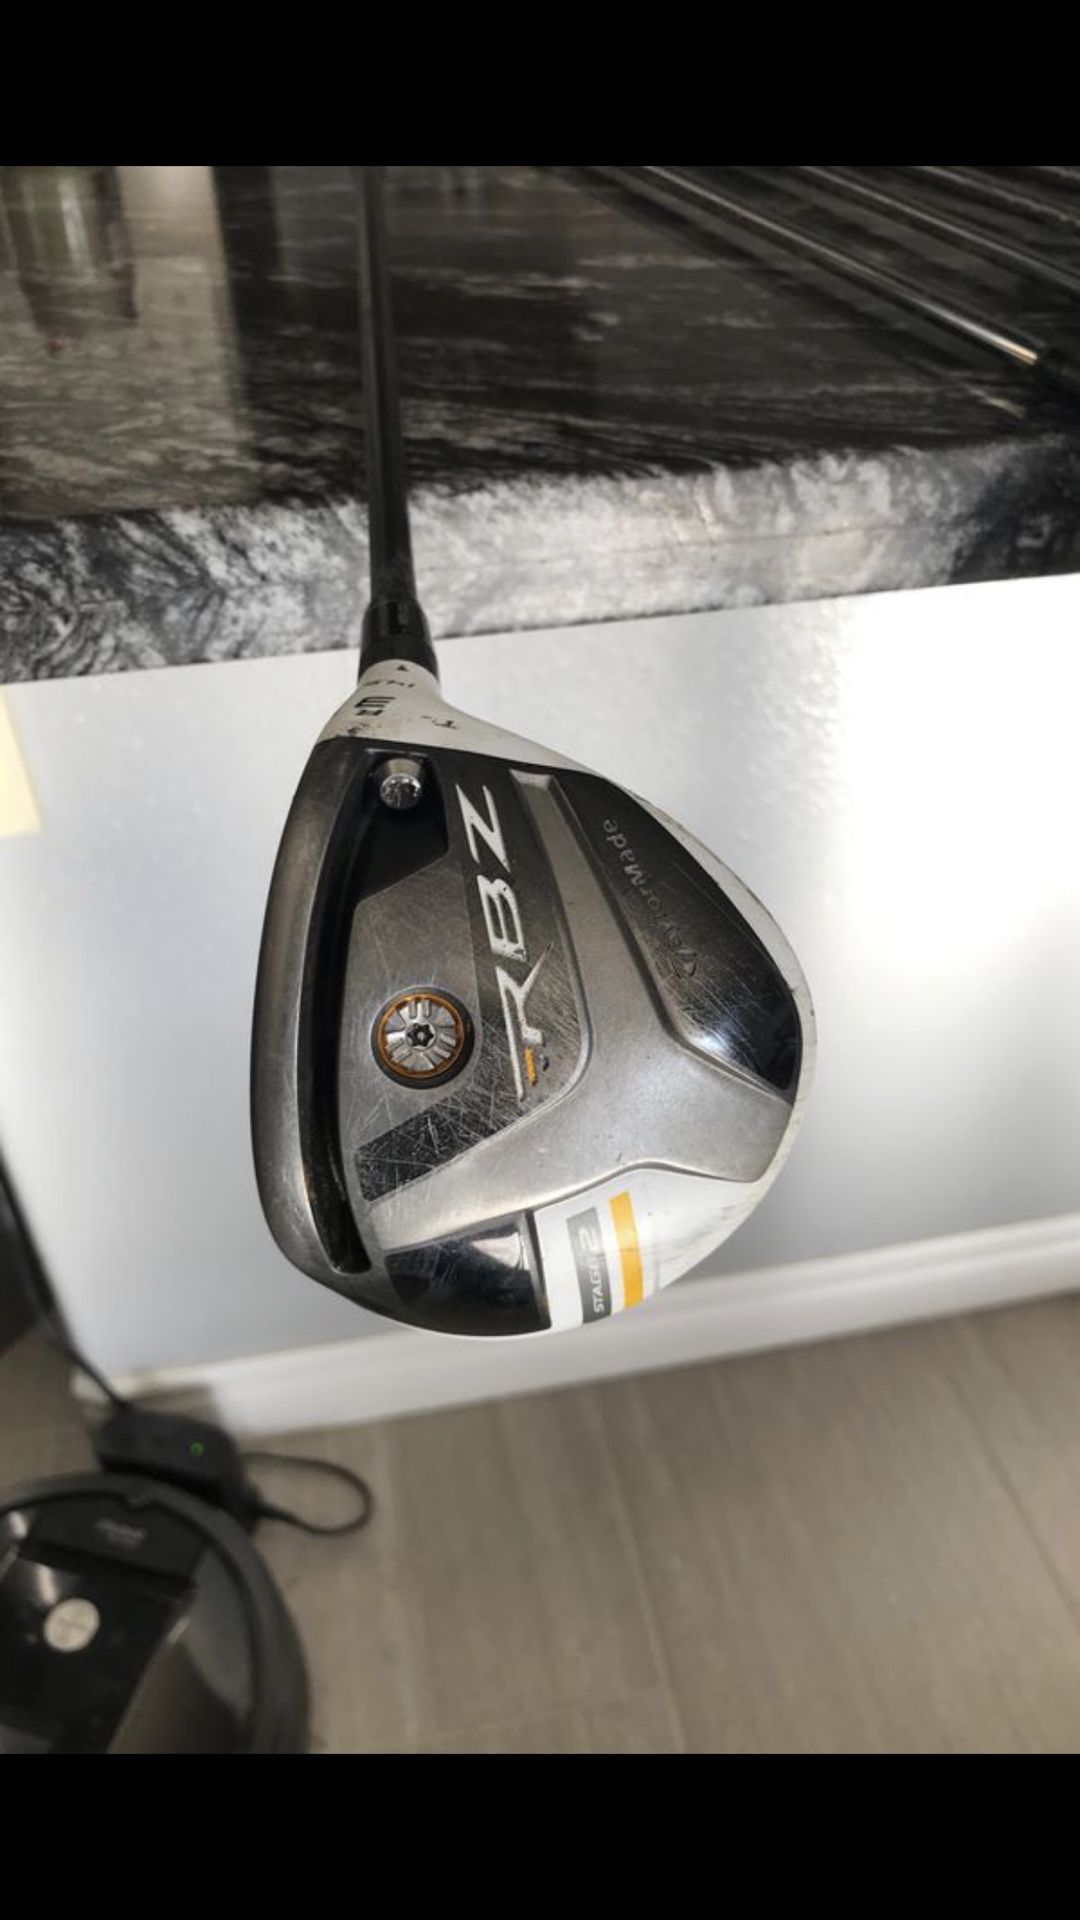 Taylormade clubs